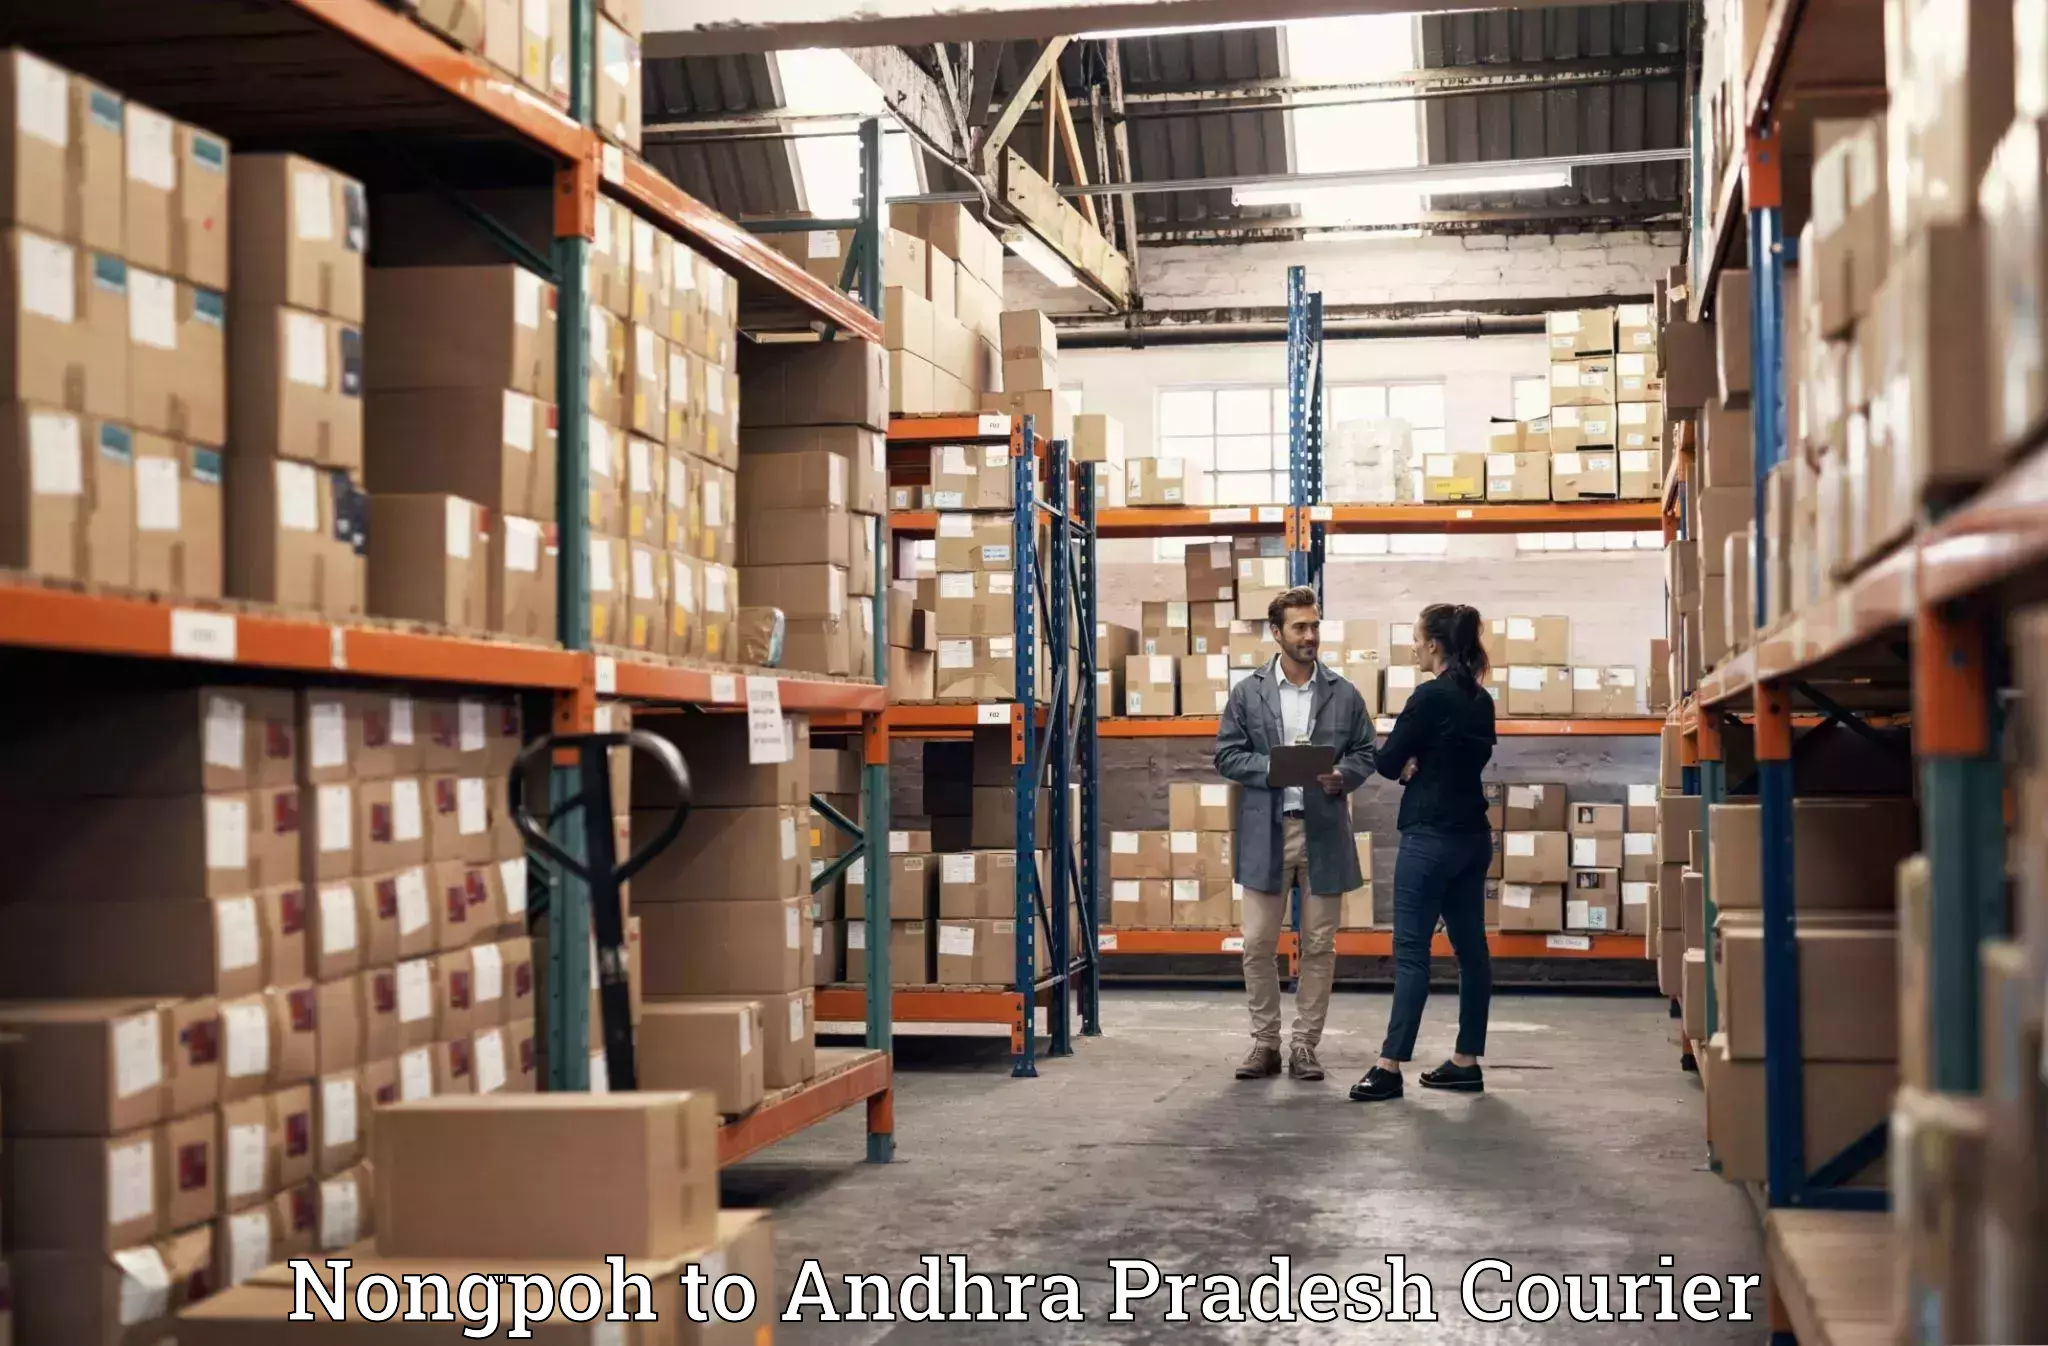 Trusted relocation services in Nongpoh to Andhra Pradesh